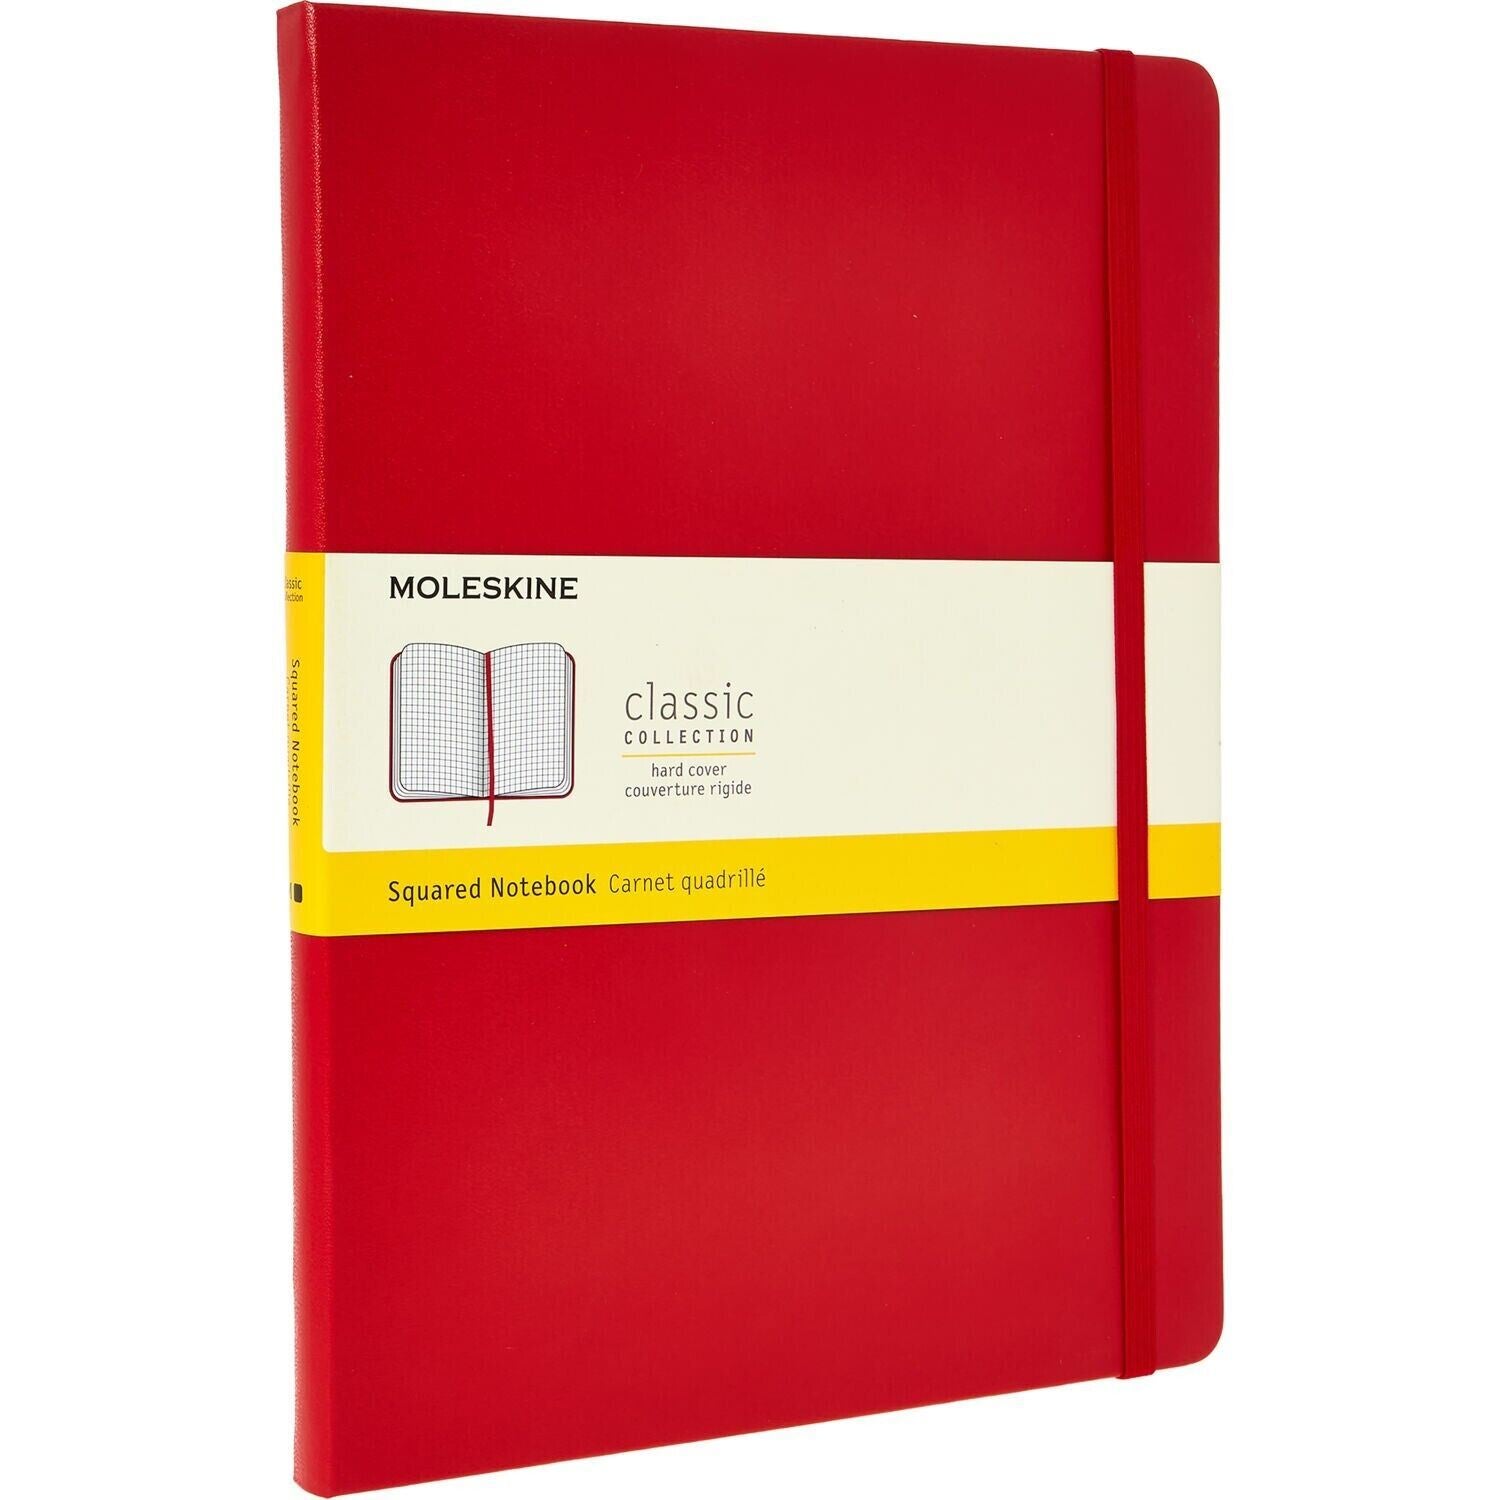 MOLESKINE - Red Squared Hard Cover Notebook, 192 pages 19cm x 25cm